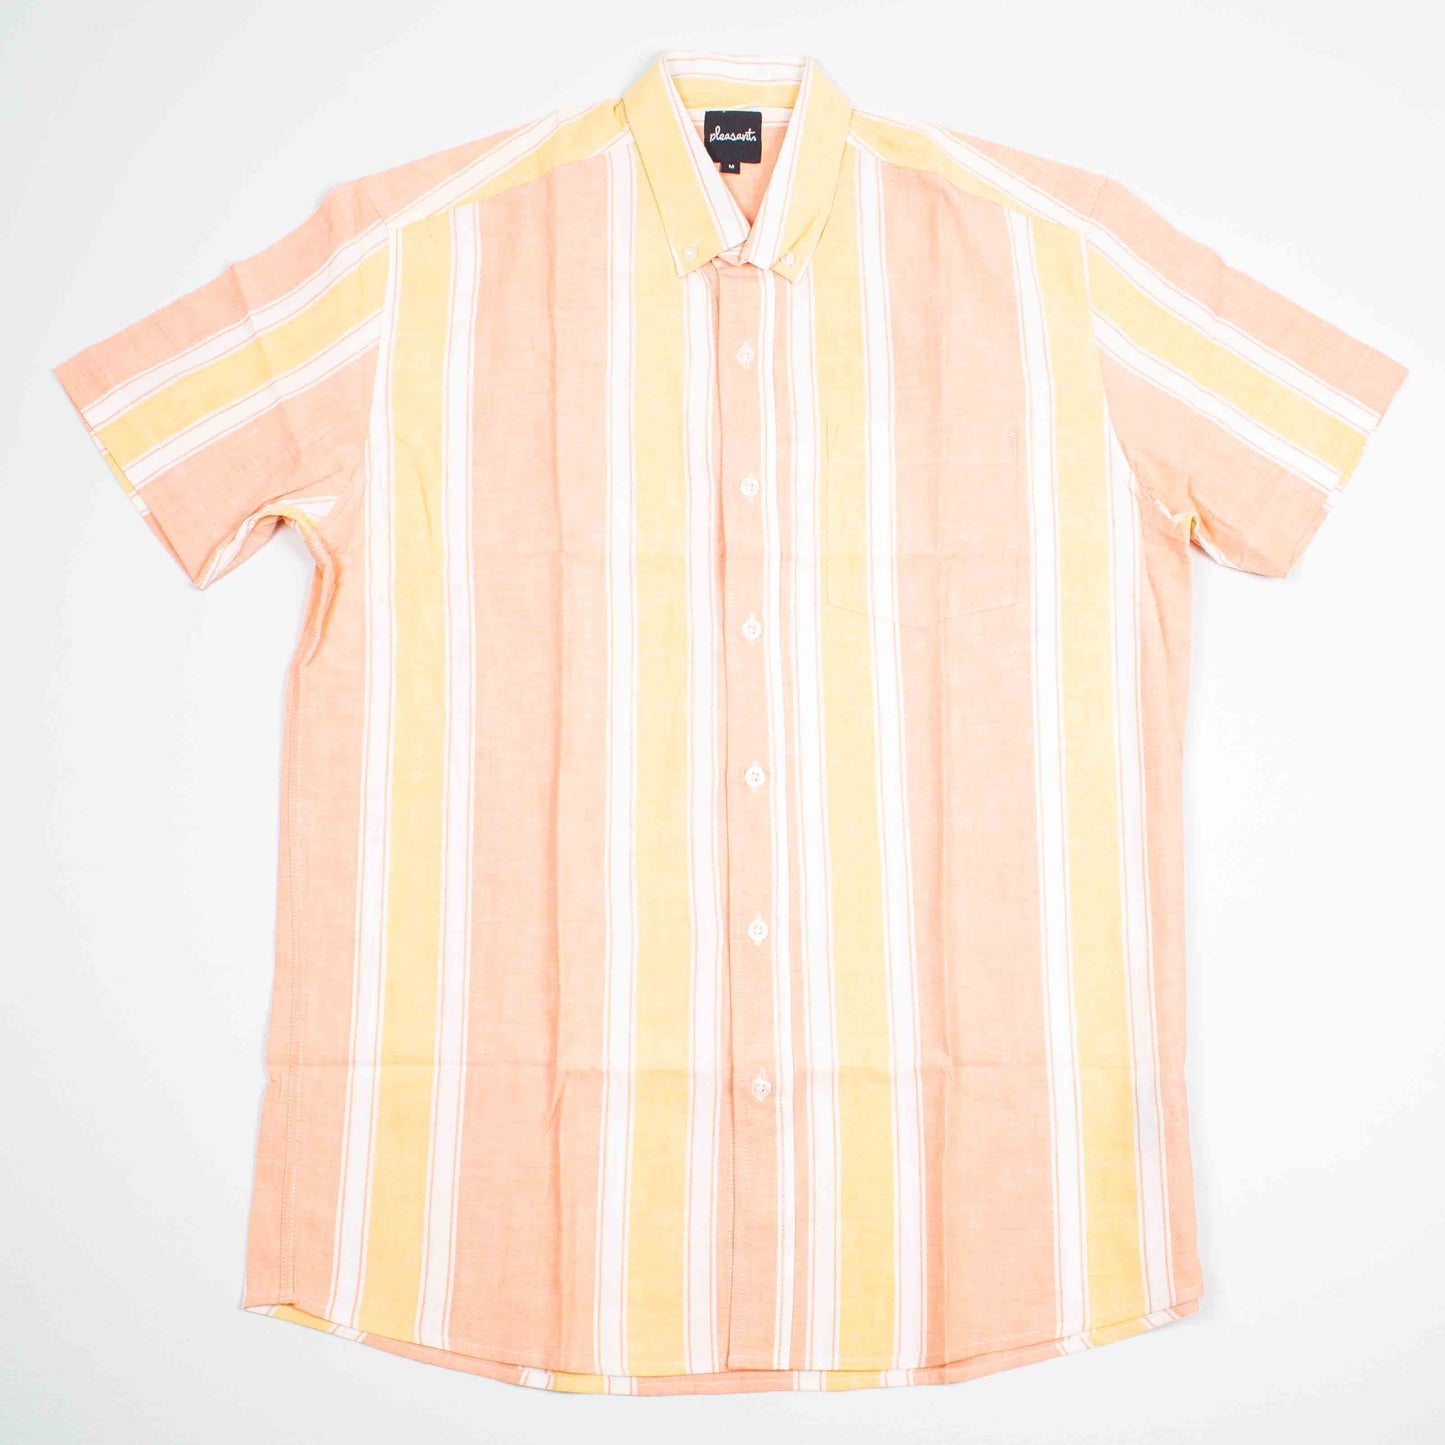 Costa del sol upcycled shirt